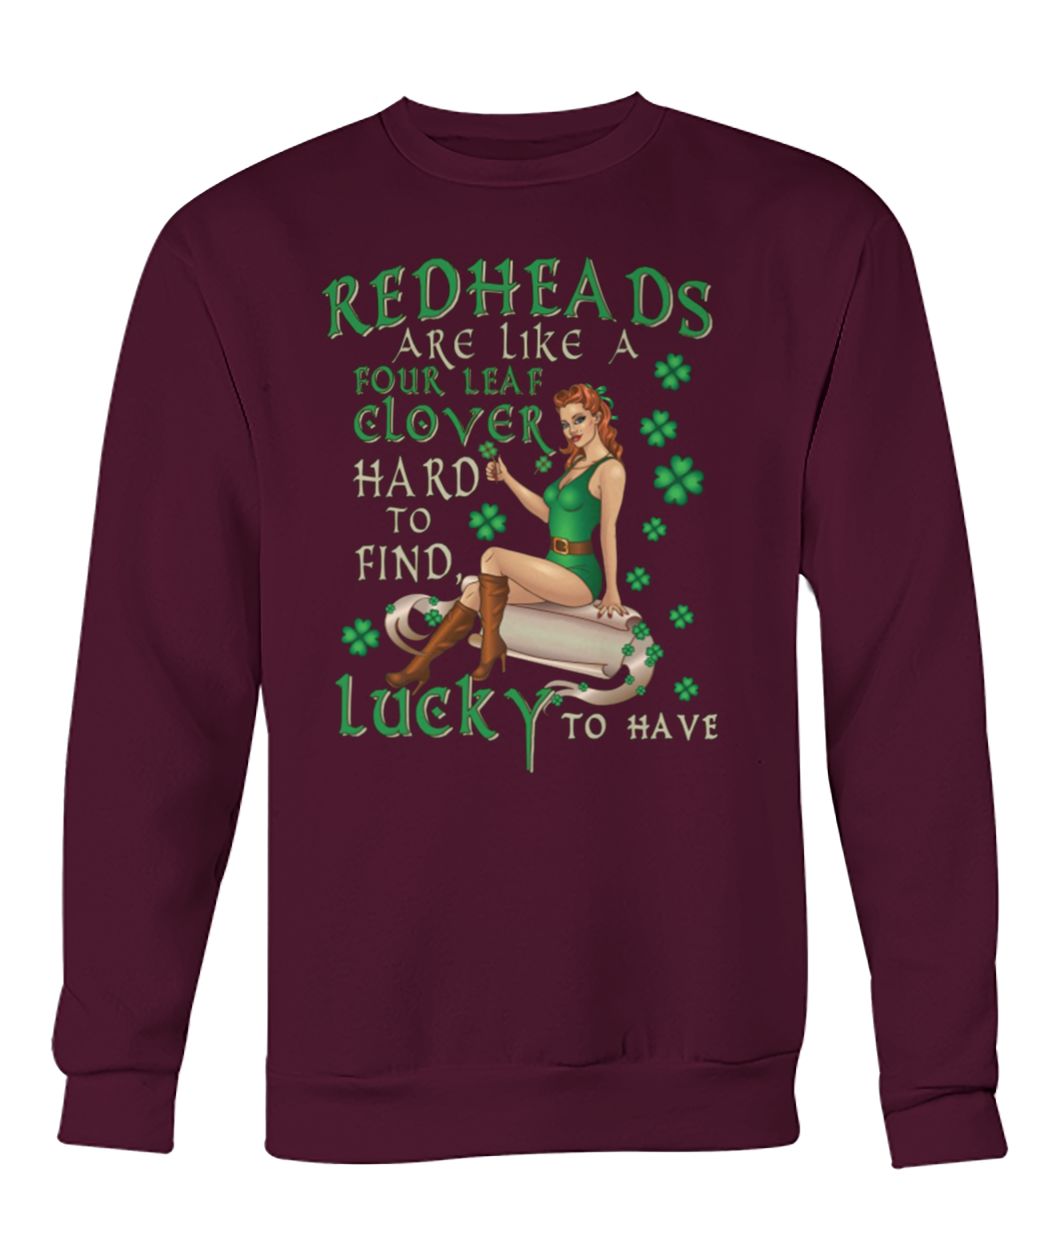 Redheads are like a four leaf clover hard to find lucky to have crew neck sweatshirt